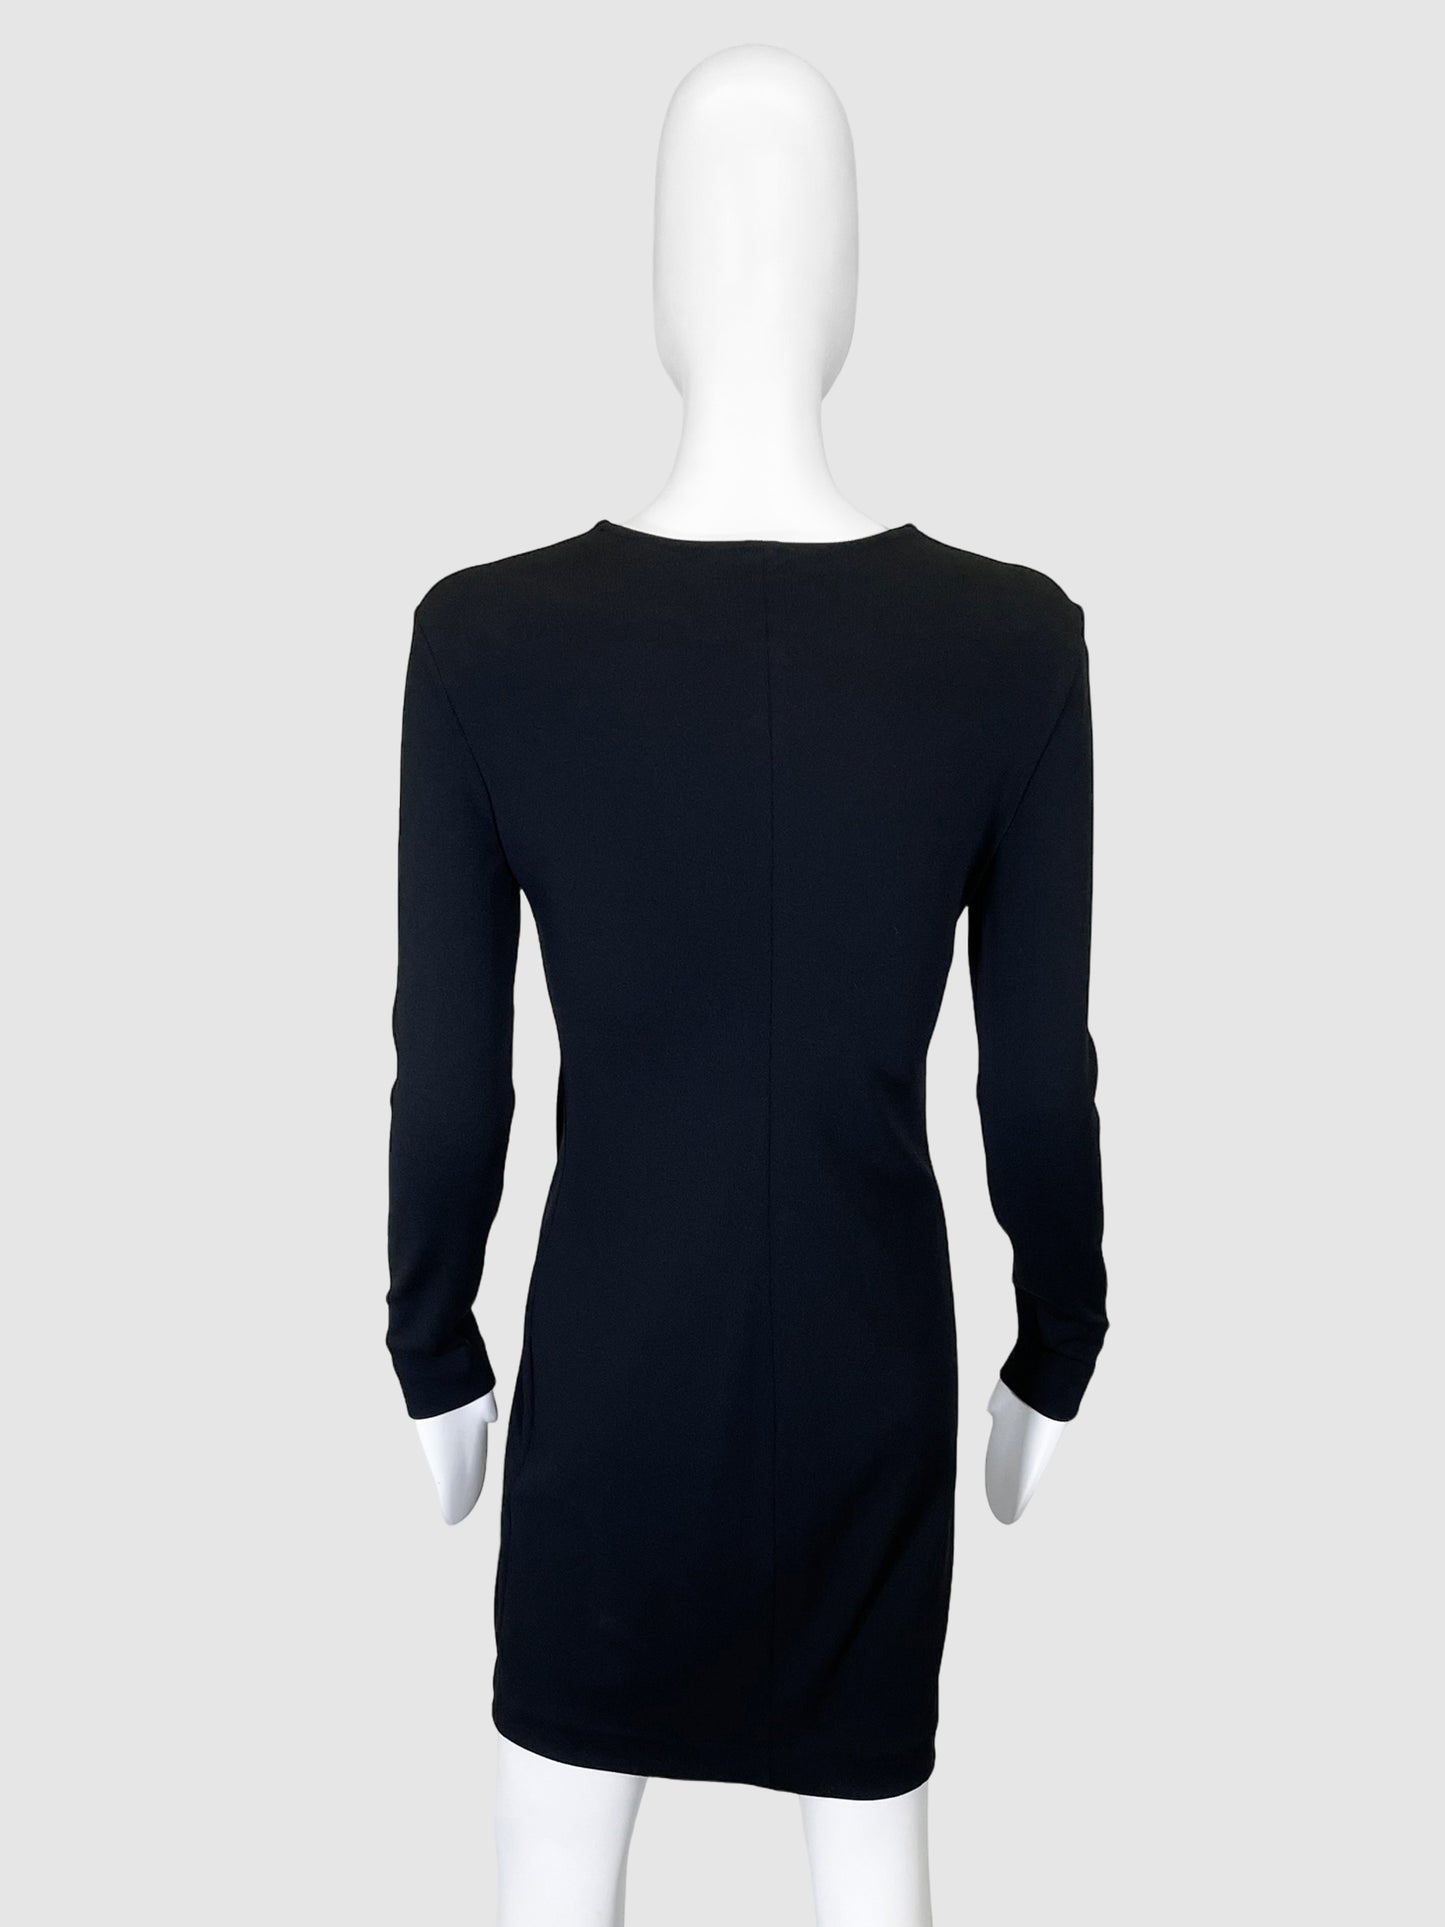 Ribbed Bodycon Dress - Size S